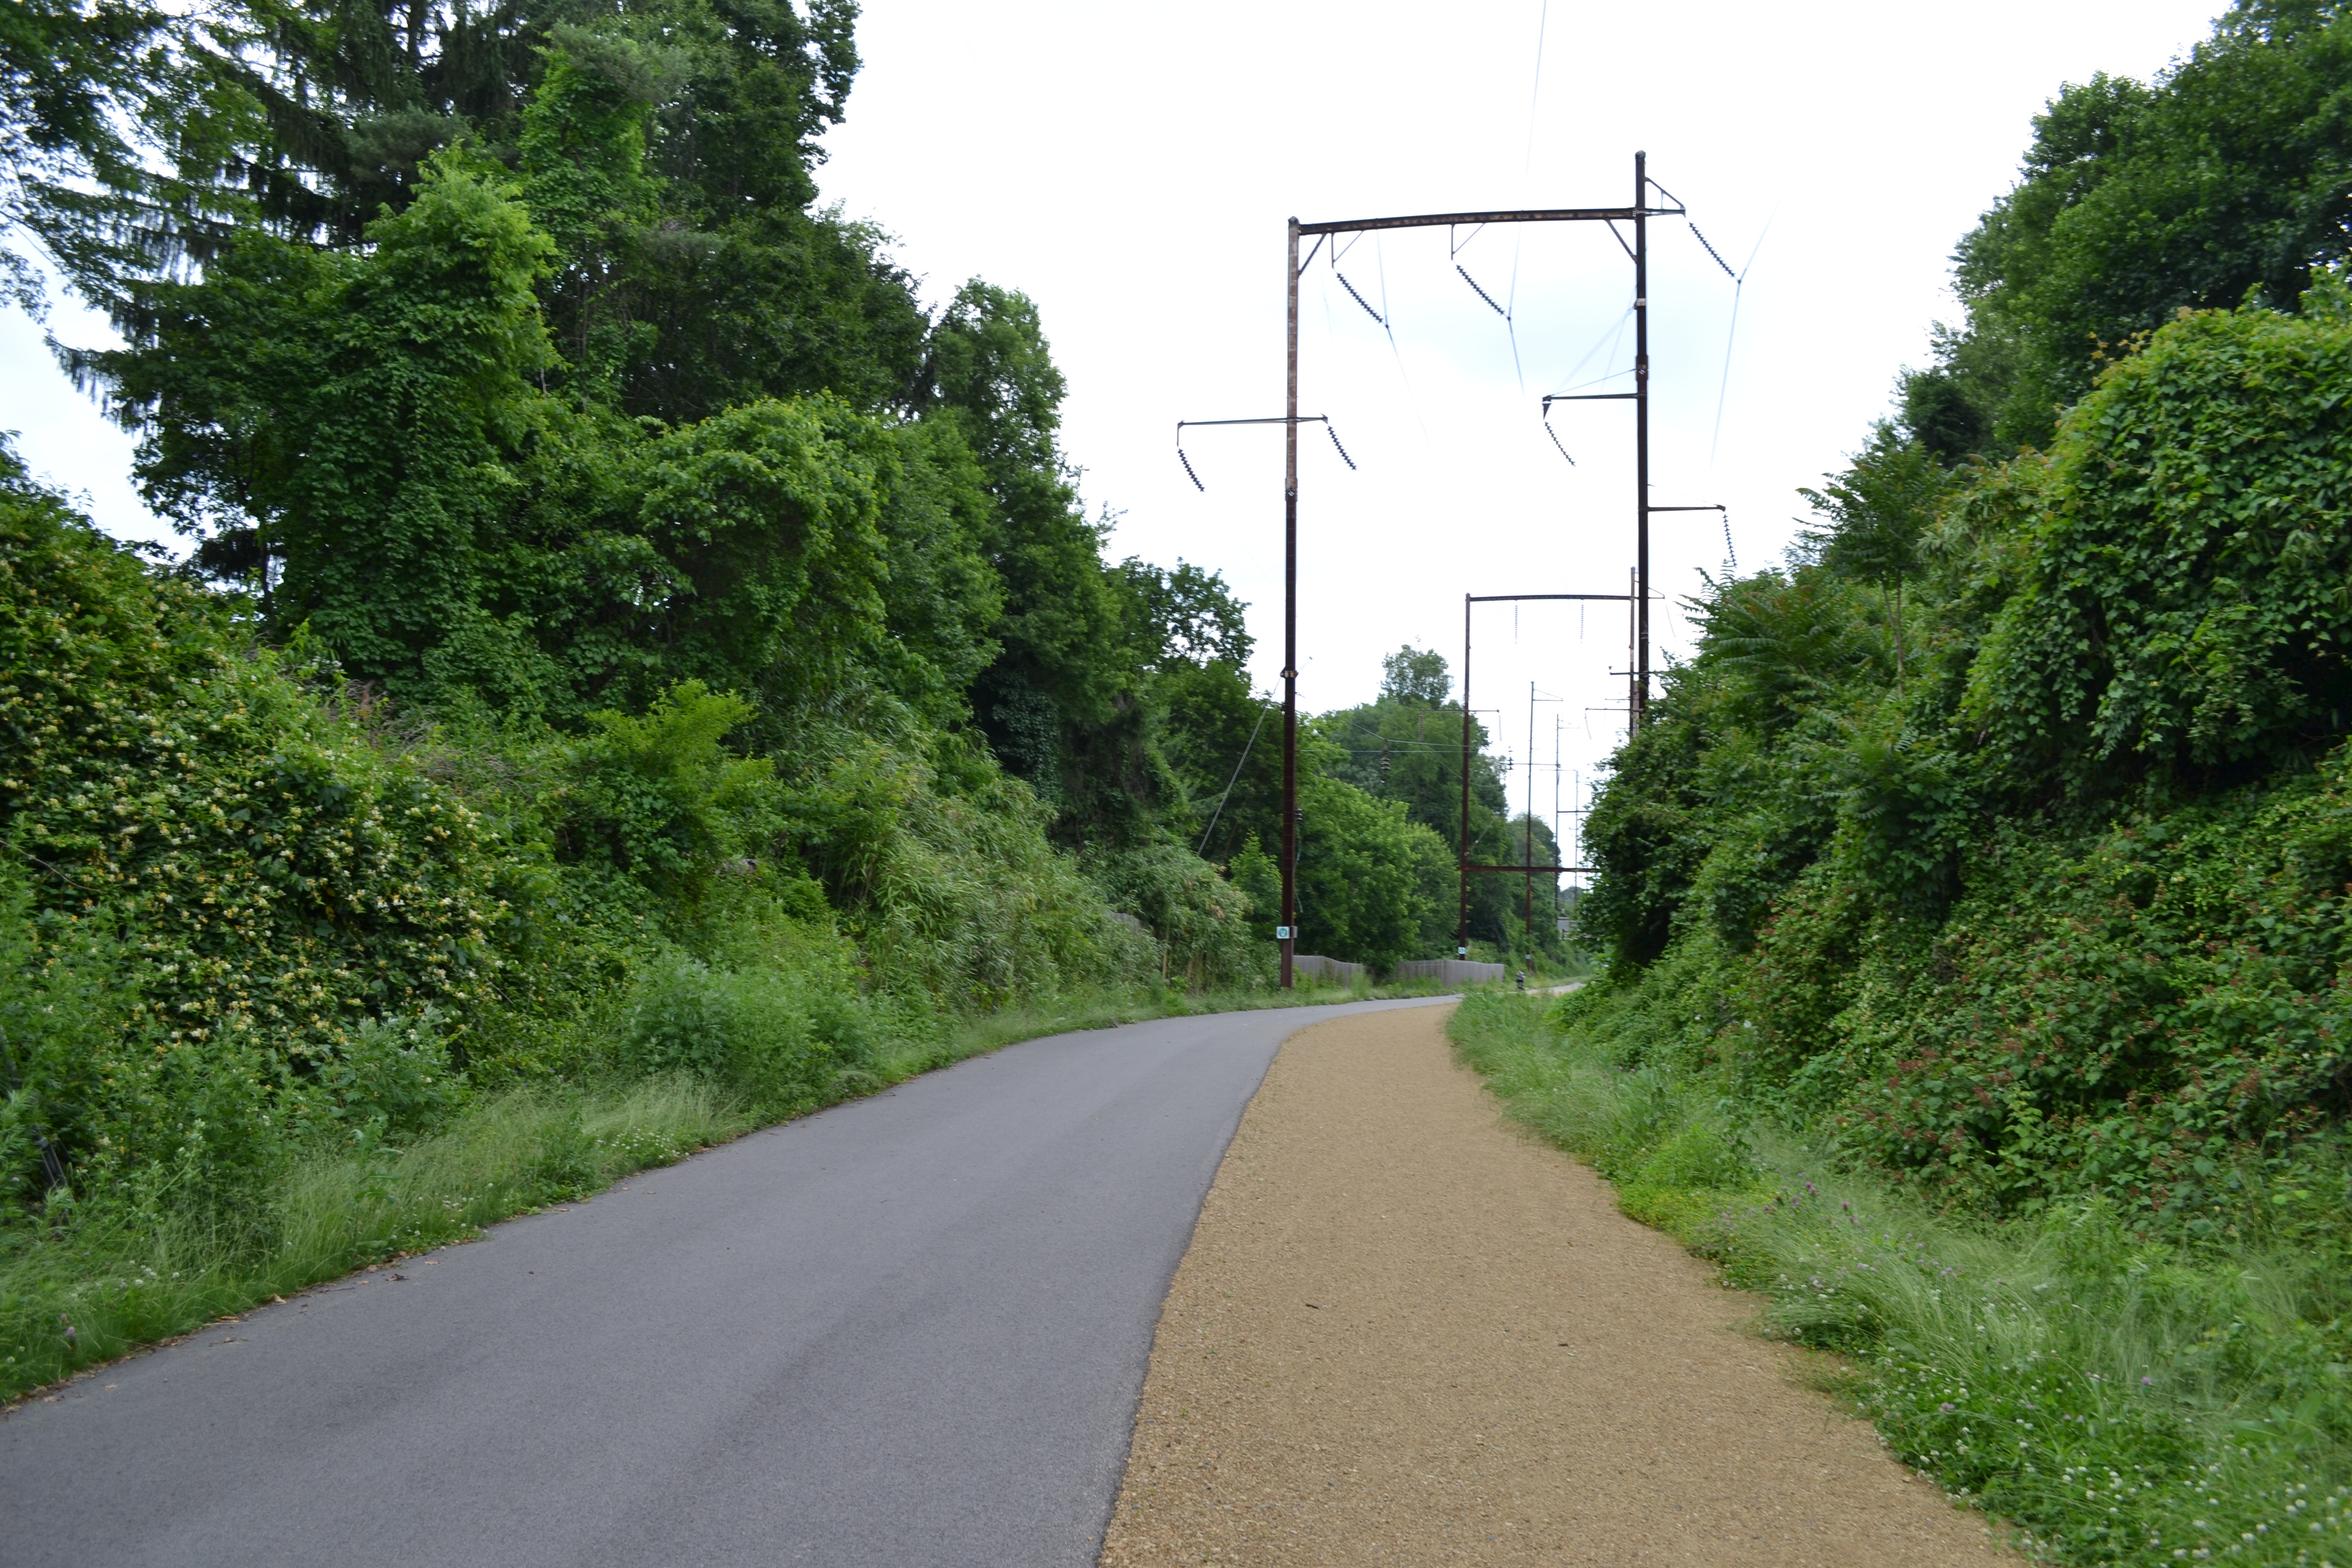 For much of the Cynwyd Heritage Trail, the paved and dirt portions run side by side